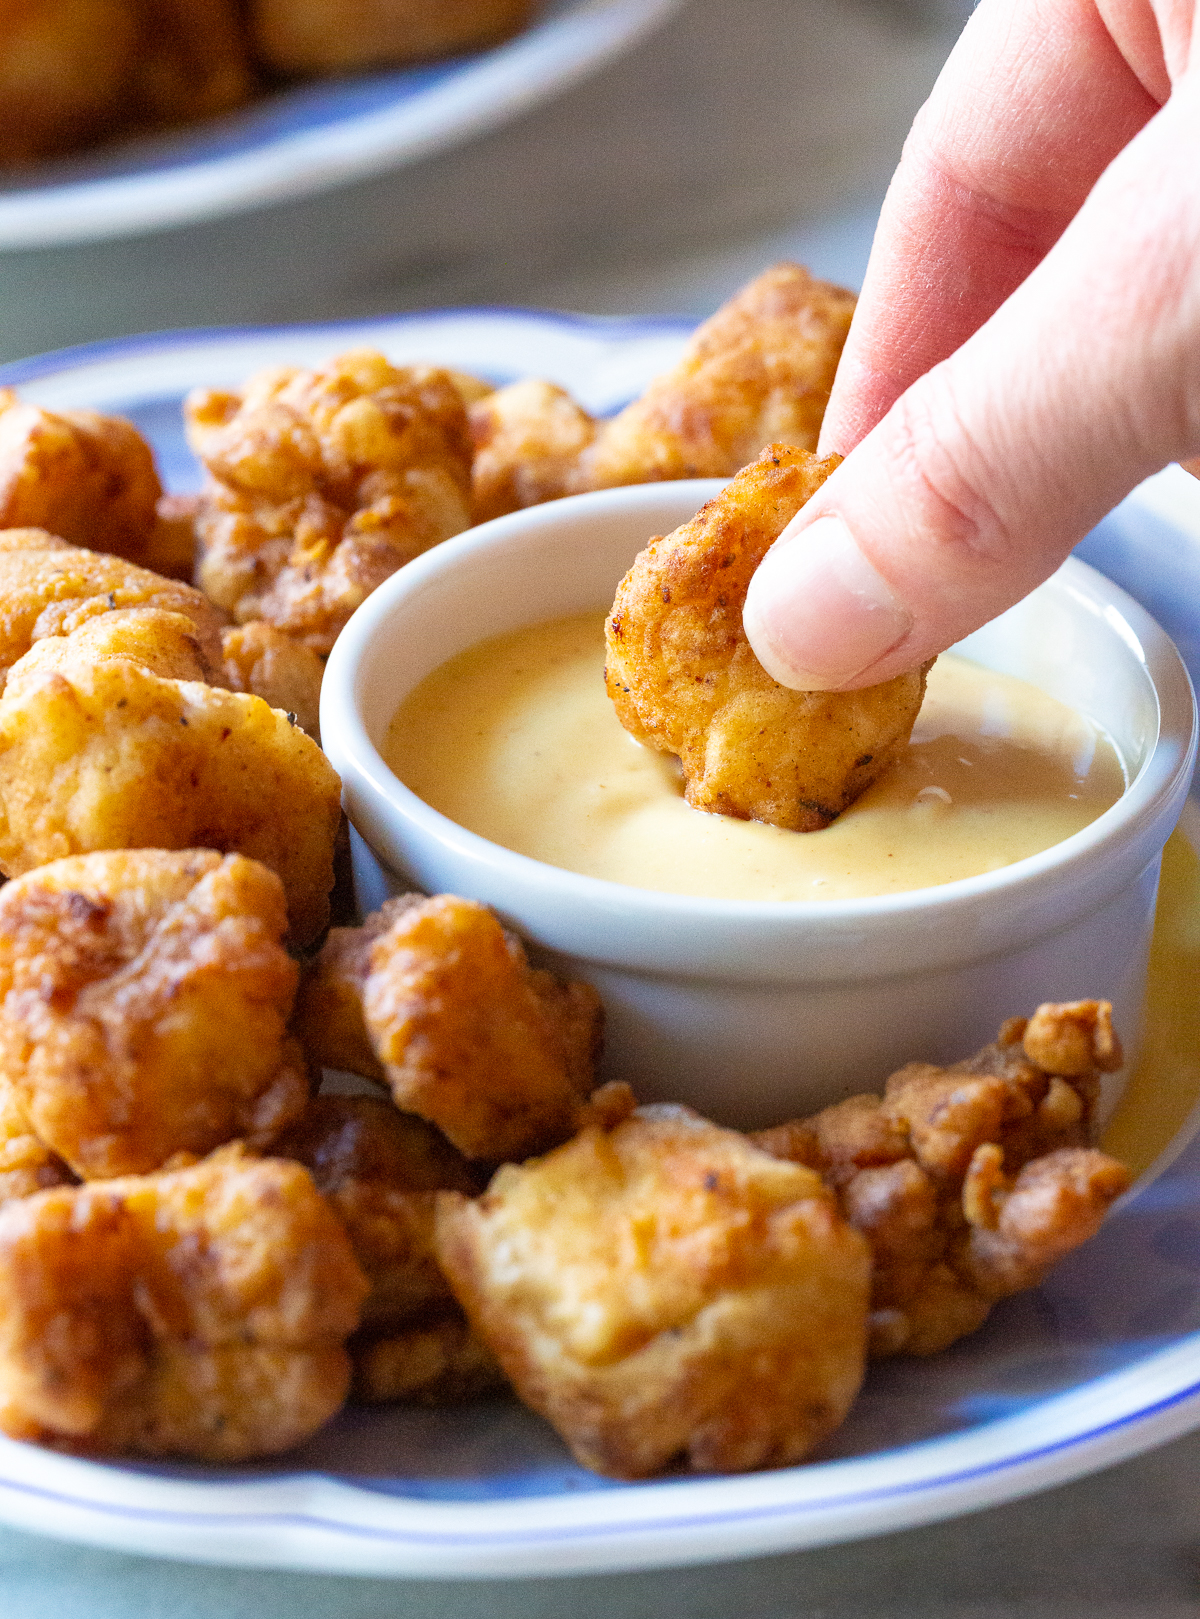 Fast Food replica - Chick Fil A Chicken Nuggets Recipe - dunked in sauce